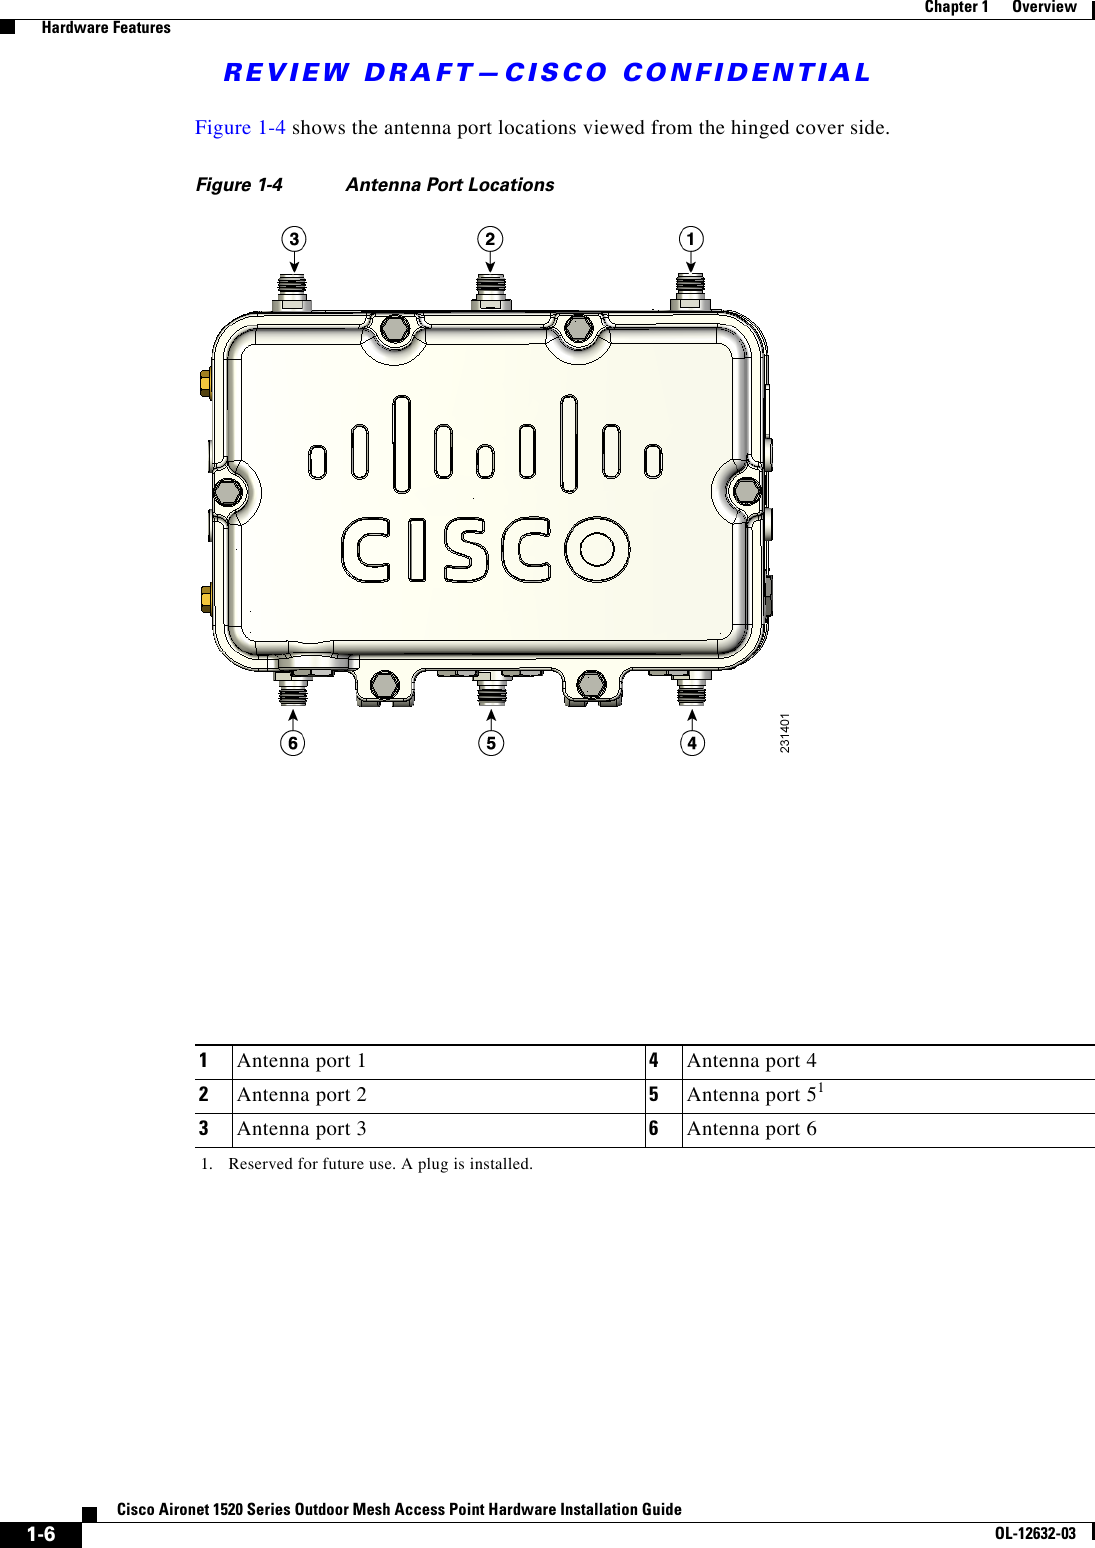 REVIEW DRAFT—CISCO CONFIDENTIAL1-6Cisco Aironet 1520 Series Outdoor Mesh Access Point Hardware Installation GuideOL-12632-03Chapter 1      Overview  Hardware FeaturesFigure 1-4 shows the antenna port locations viewed from the hinged cover side.Figure 1-4 Antenna Port Locations1Antenna port 1 4Antenna port 42Antenna port 2 5Antenna port 51 1. Reserved for future use. A plug is installed.3Antenna port 3 6Antenna port 6